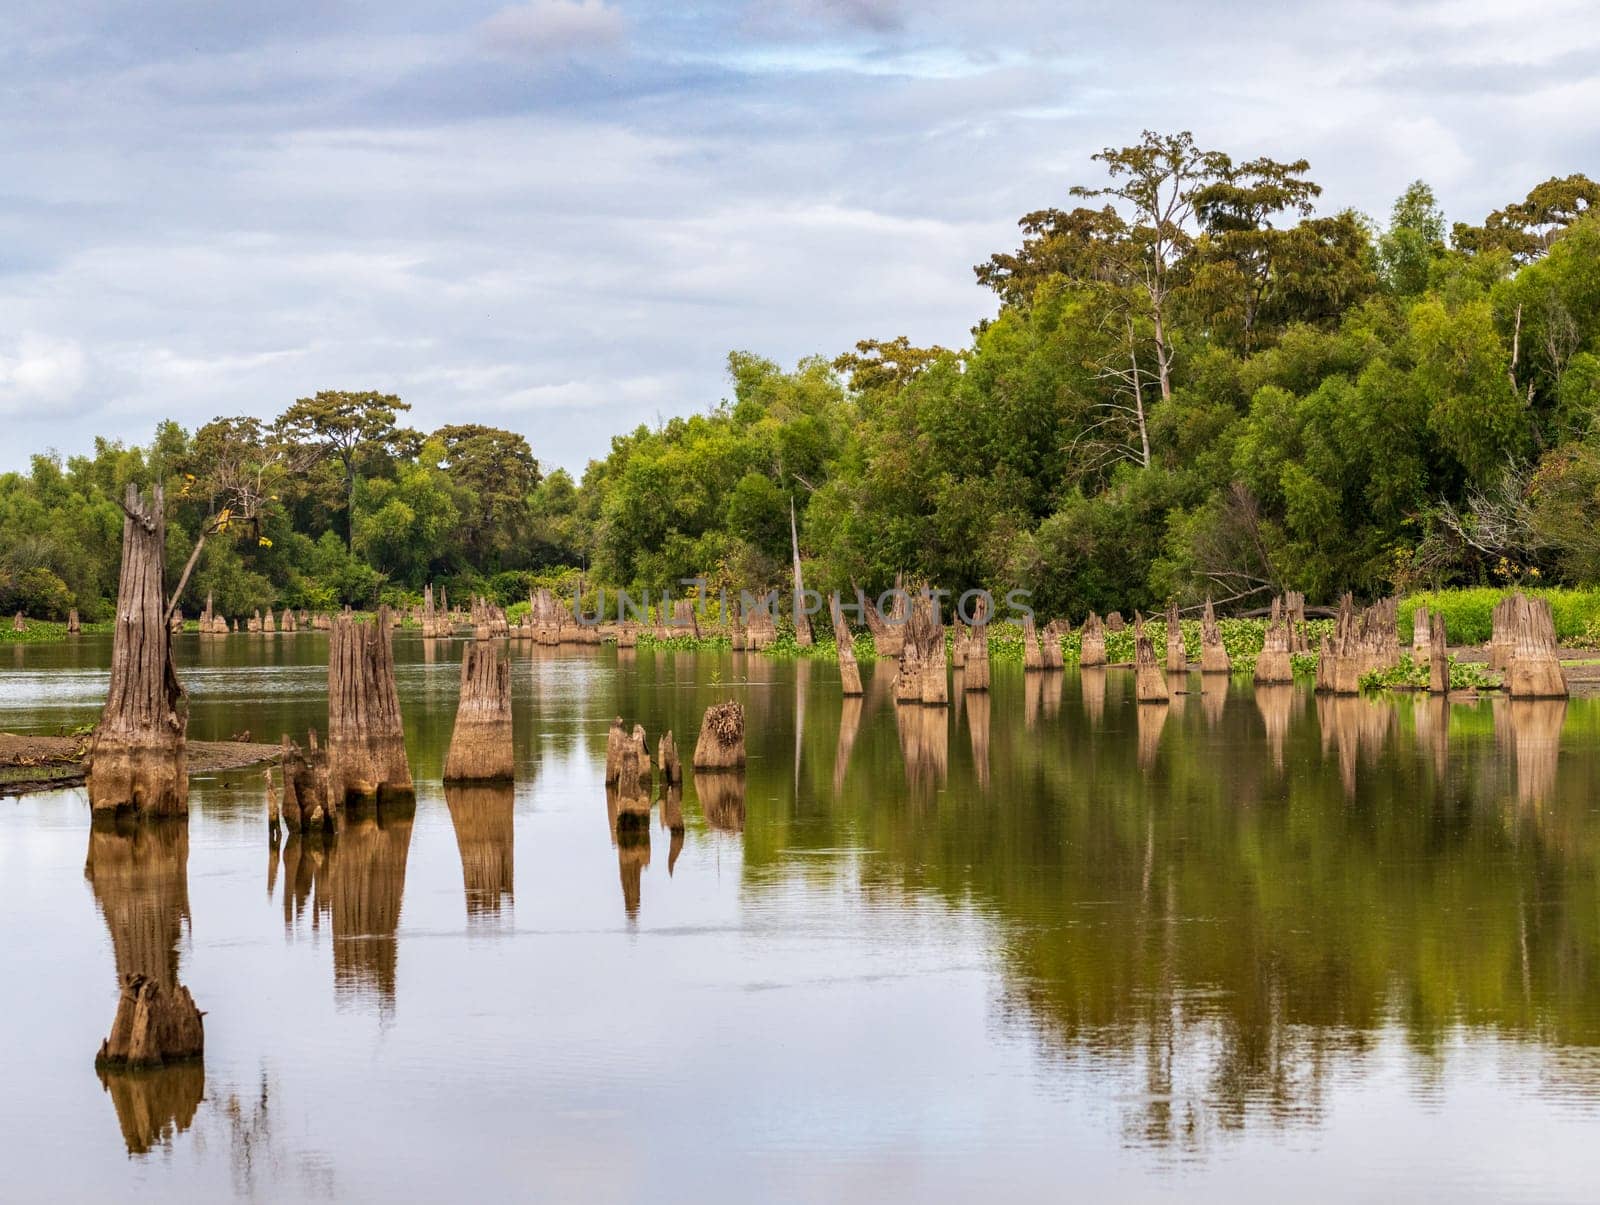 Stumps of bald cypress trees rise out of water in Atchafalaya basin by steheap